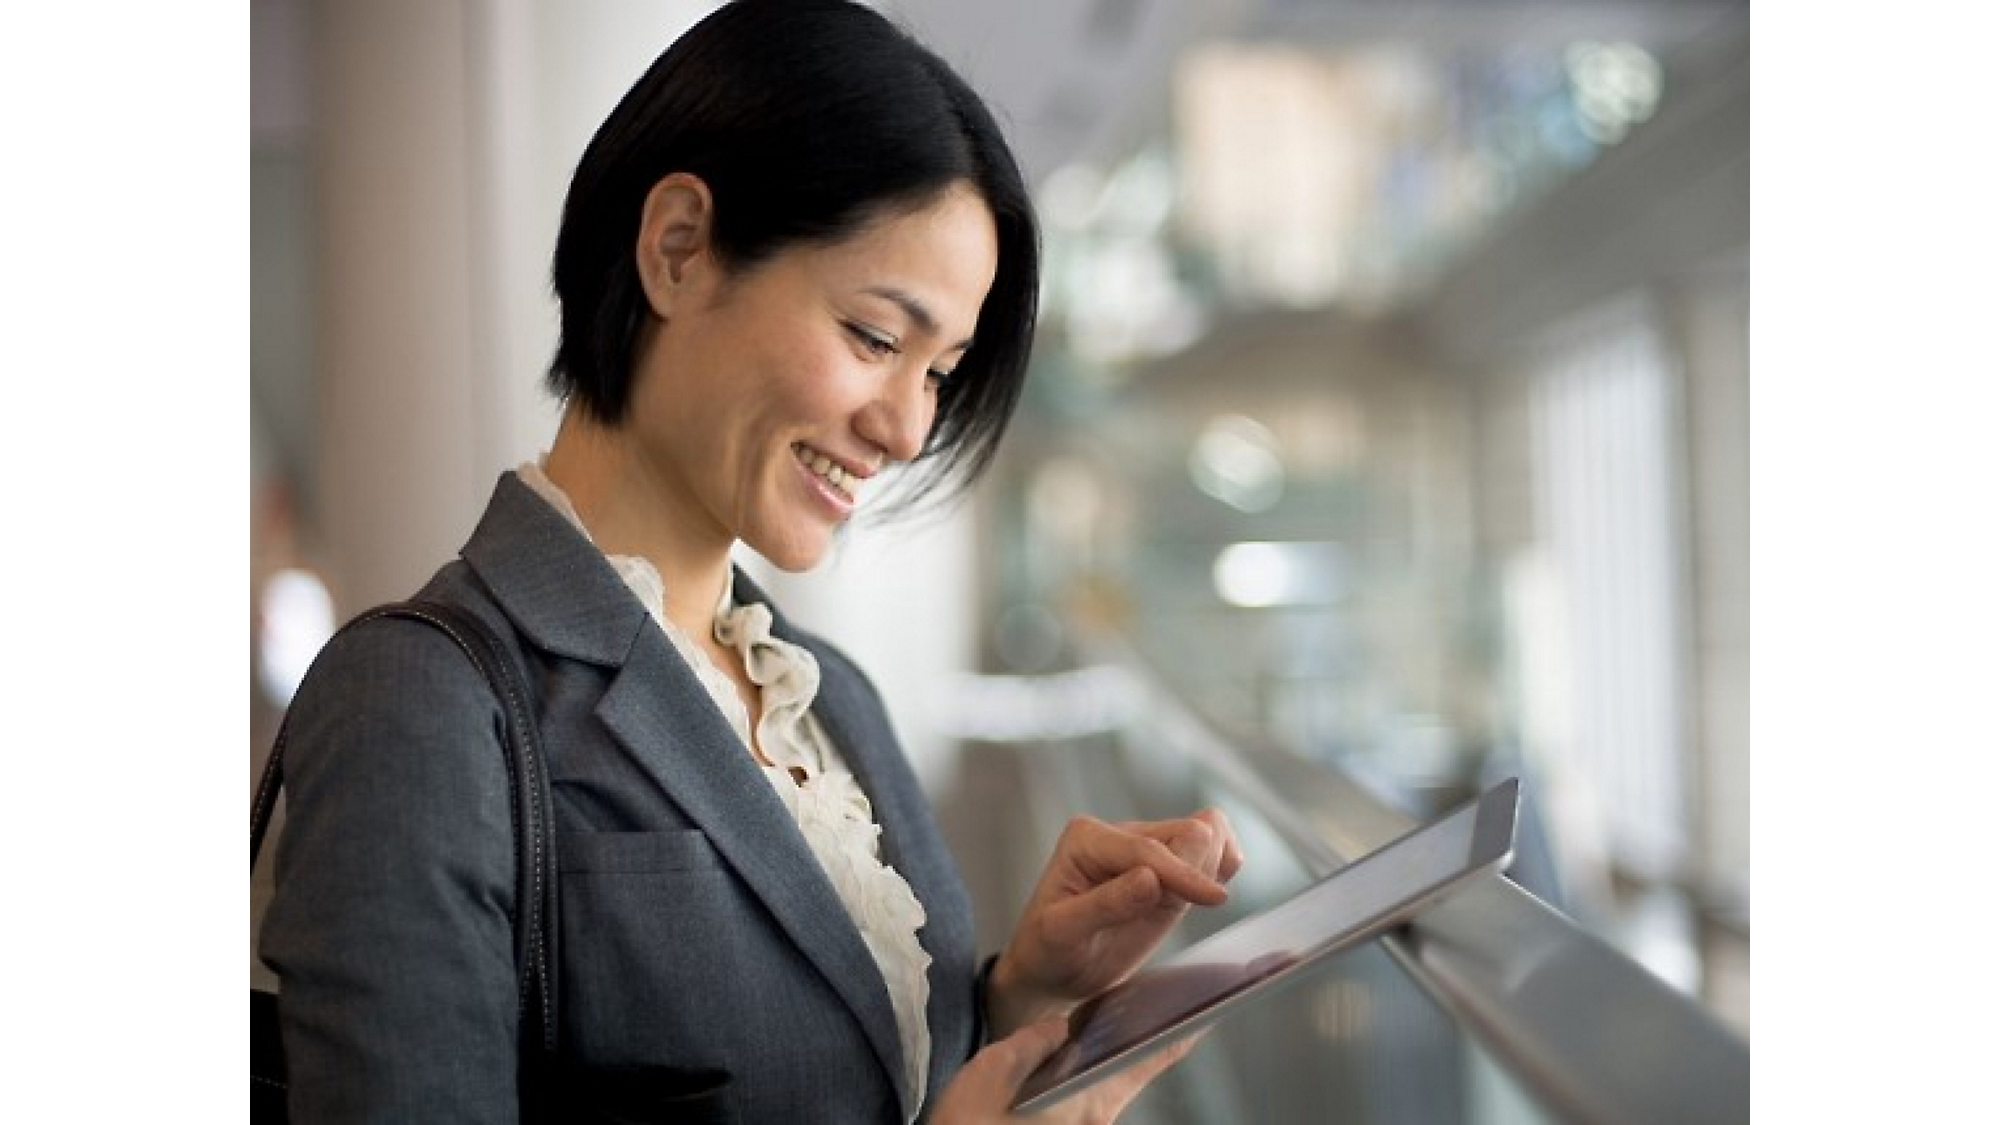 A smiling asian businesswoman using a tablet in a modern office setting.